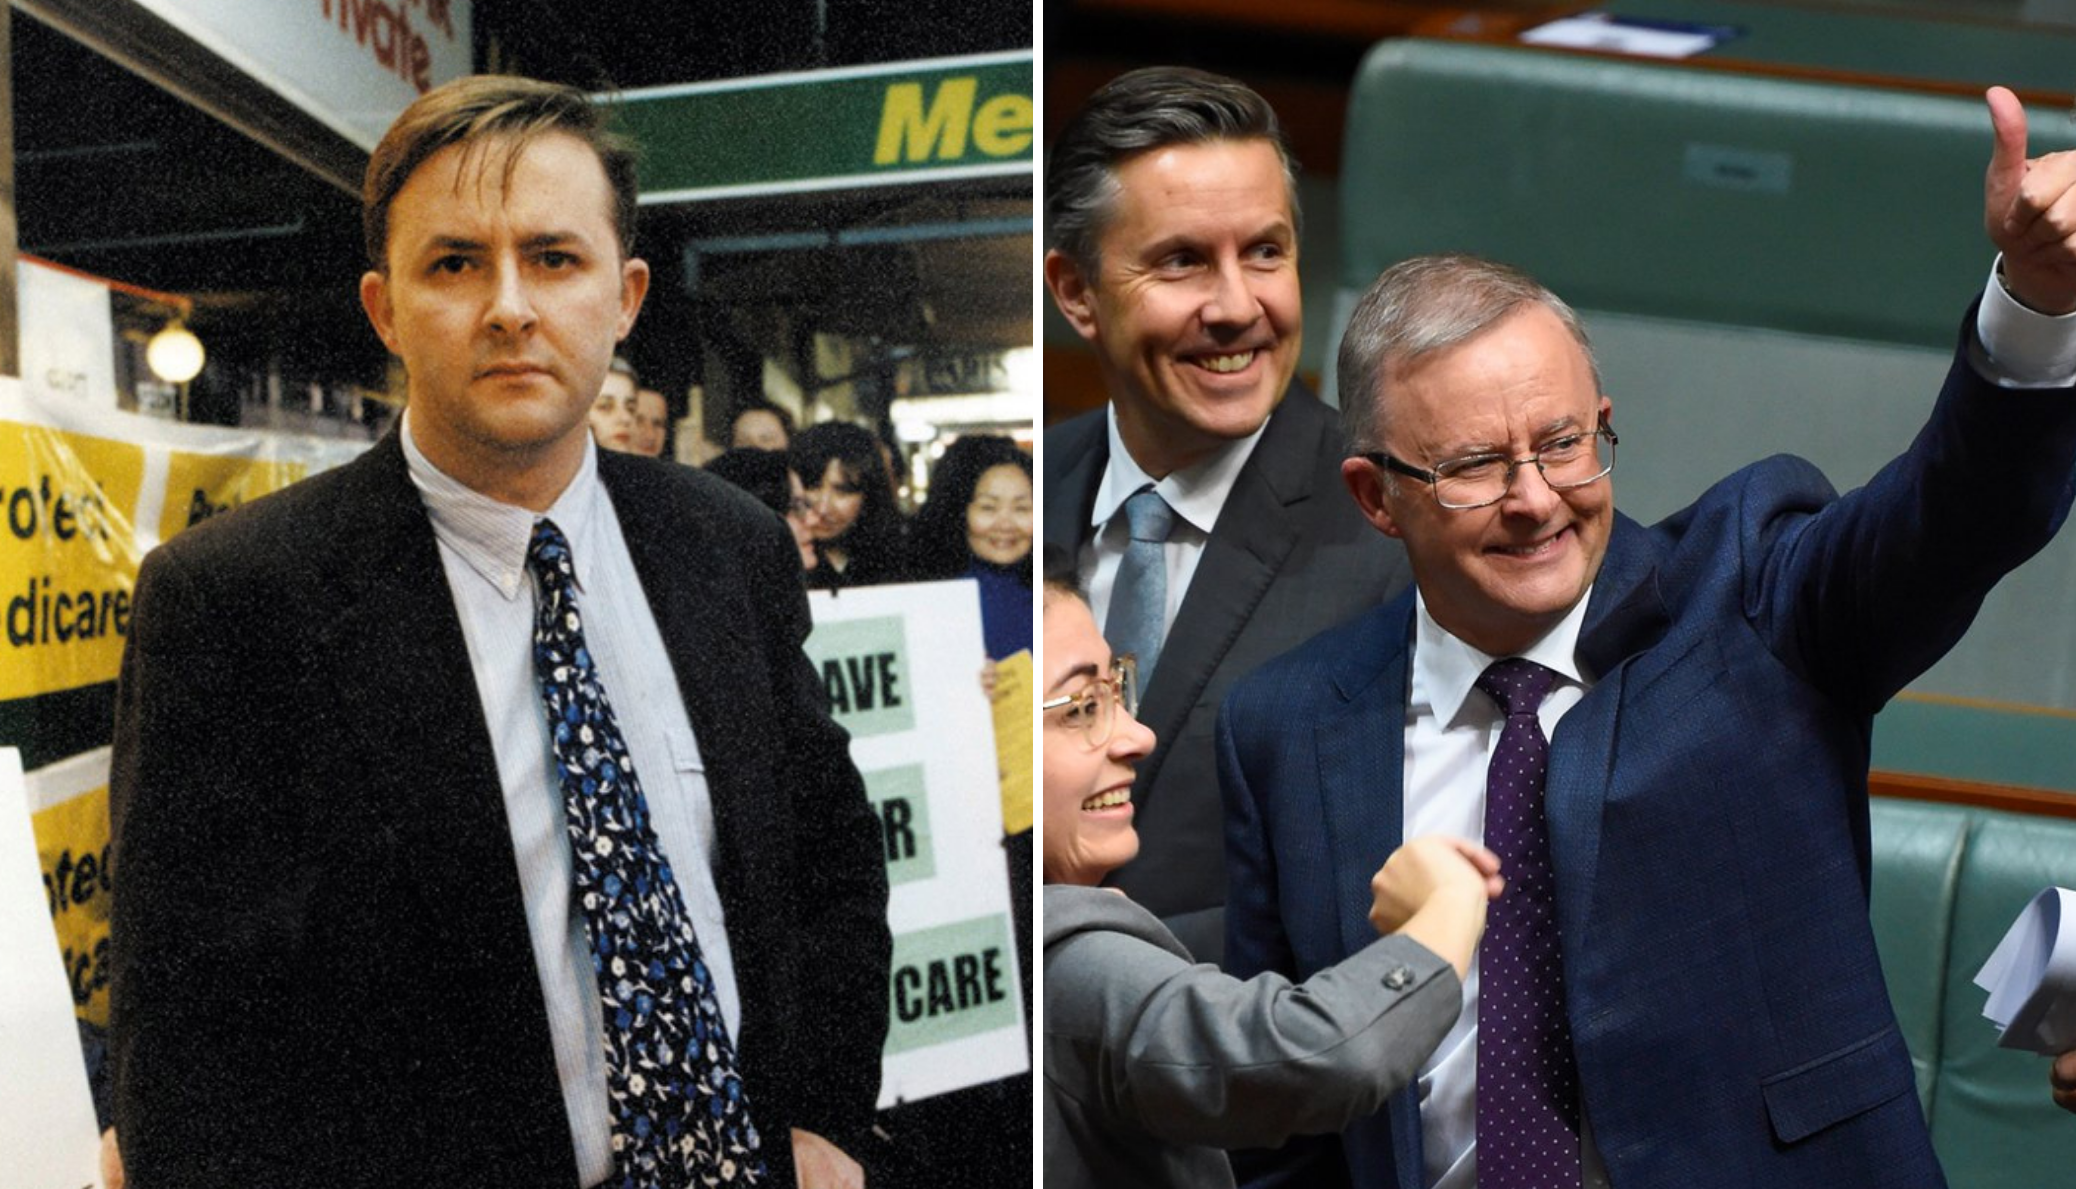 THE HON ANTHONY ALBANESE MP – FROM A PUBLIC HOUSE TO PARLIAMENT HOUSE TO THE LODGE?